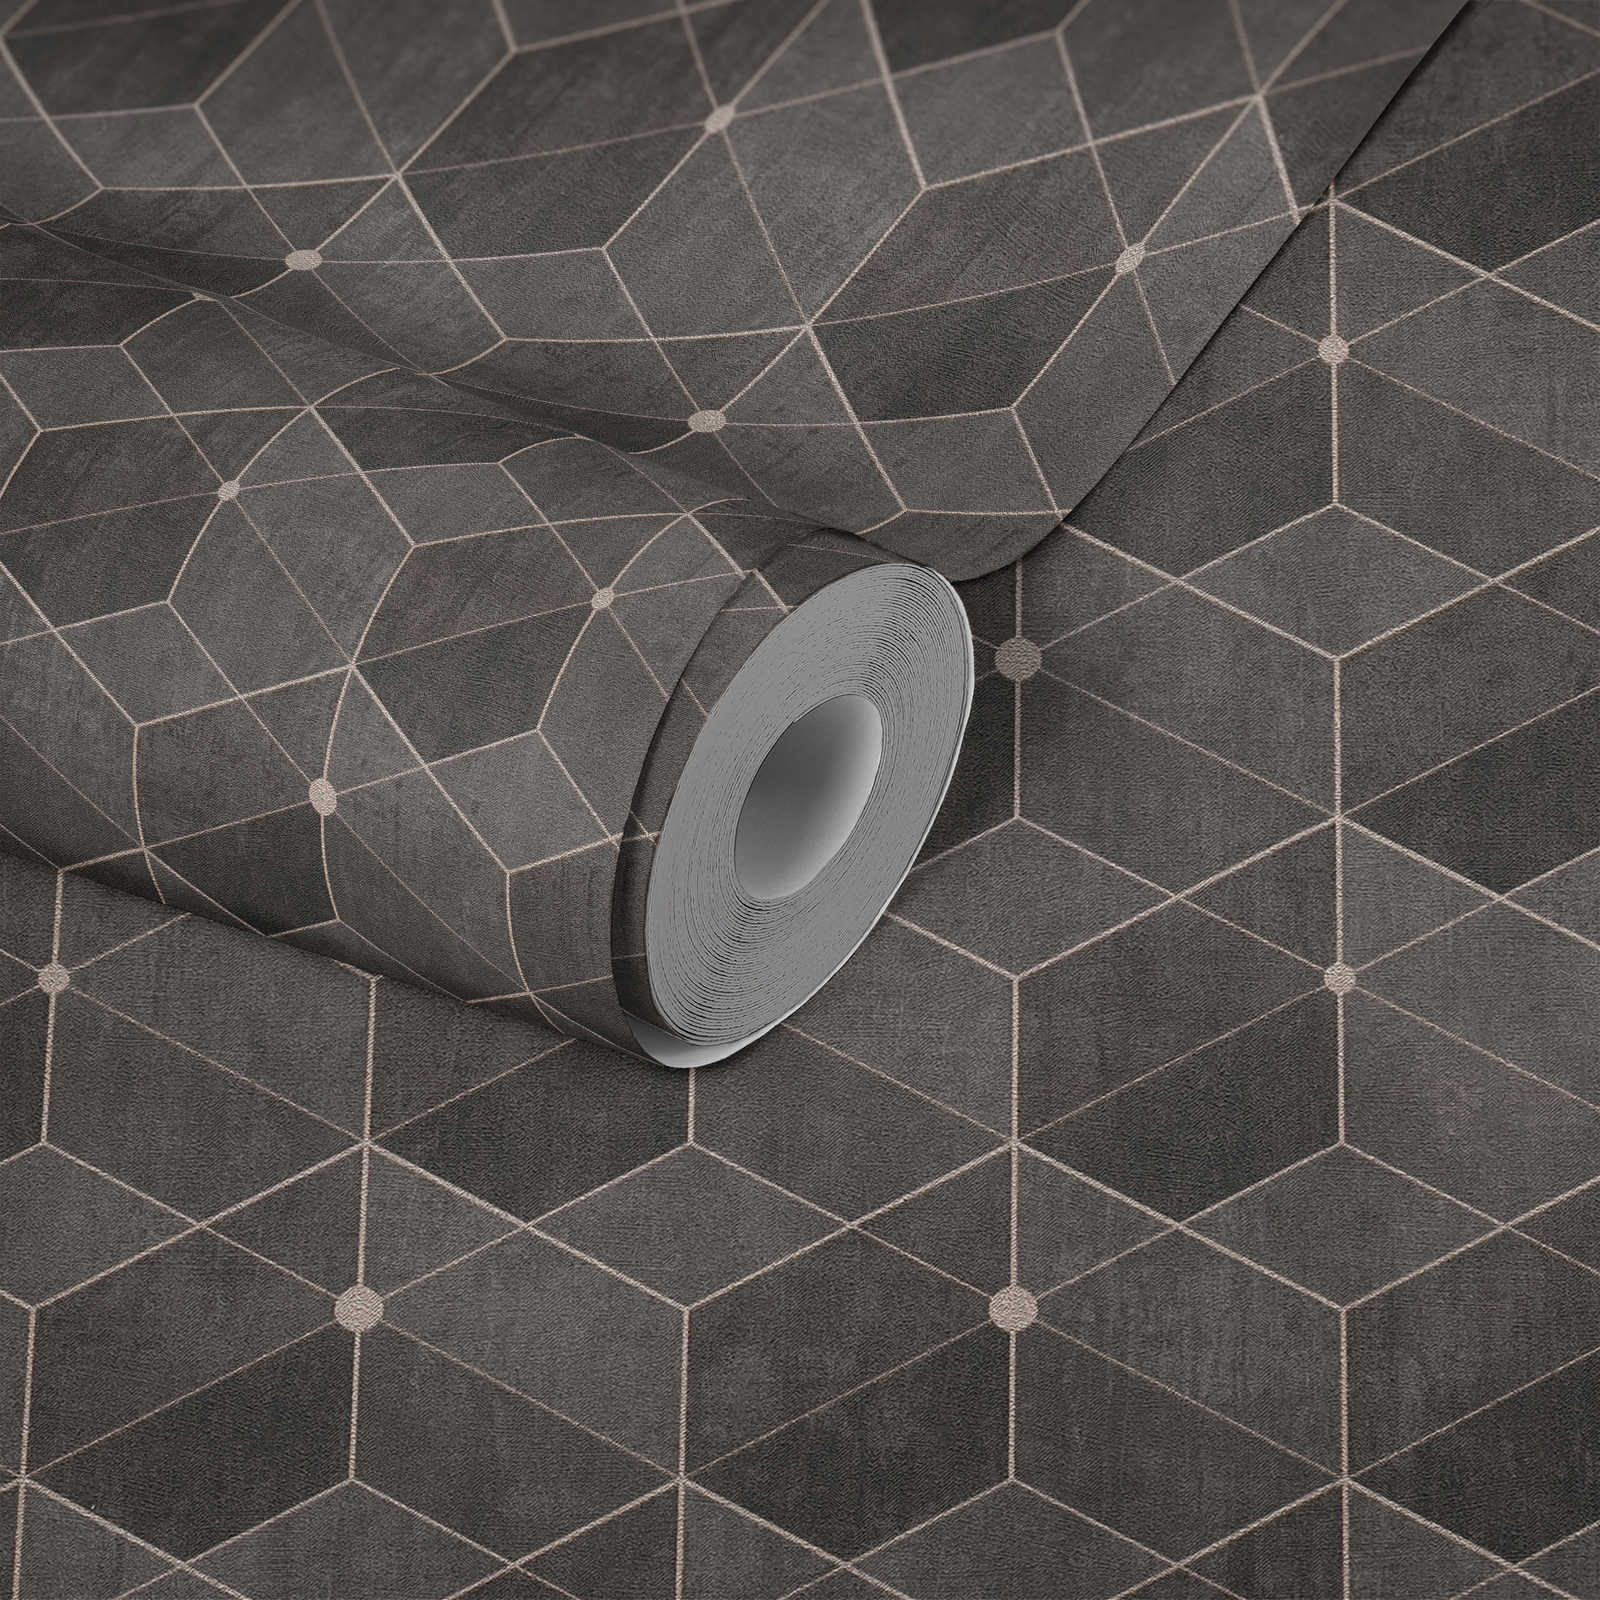             Retro wallpaper with graphic pattern & metallic accent - brown
        